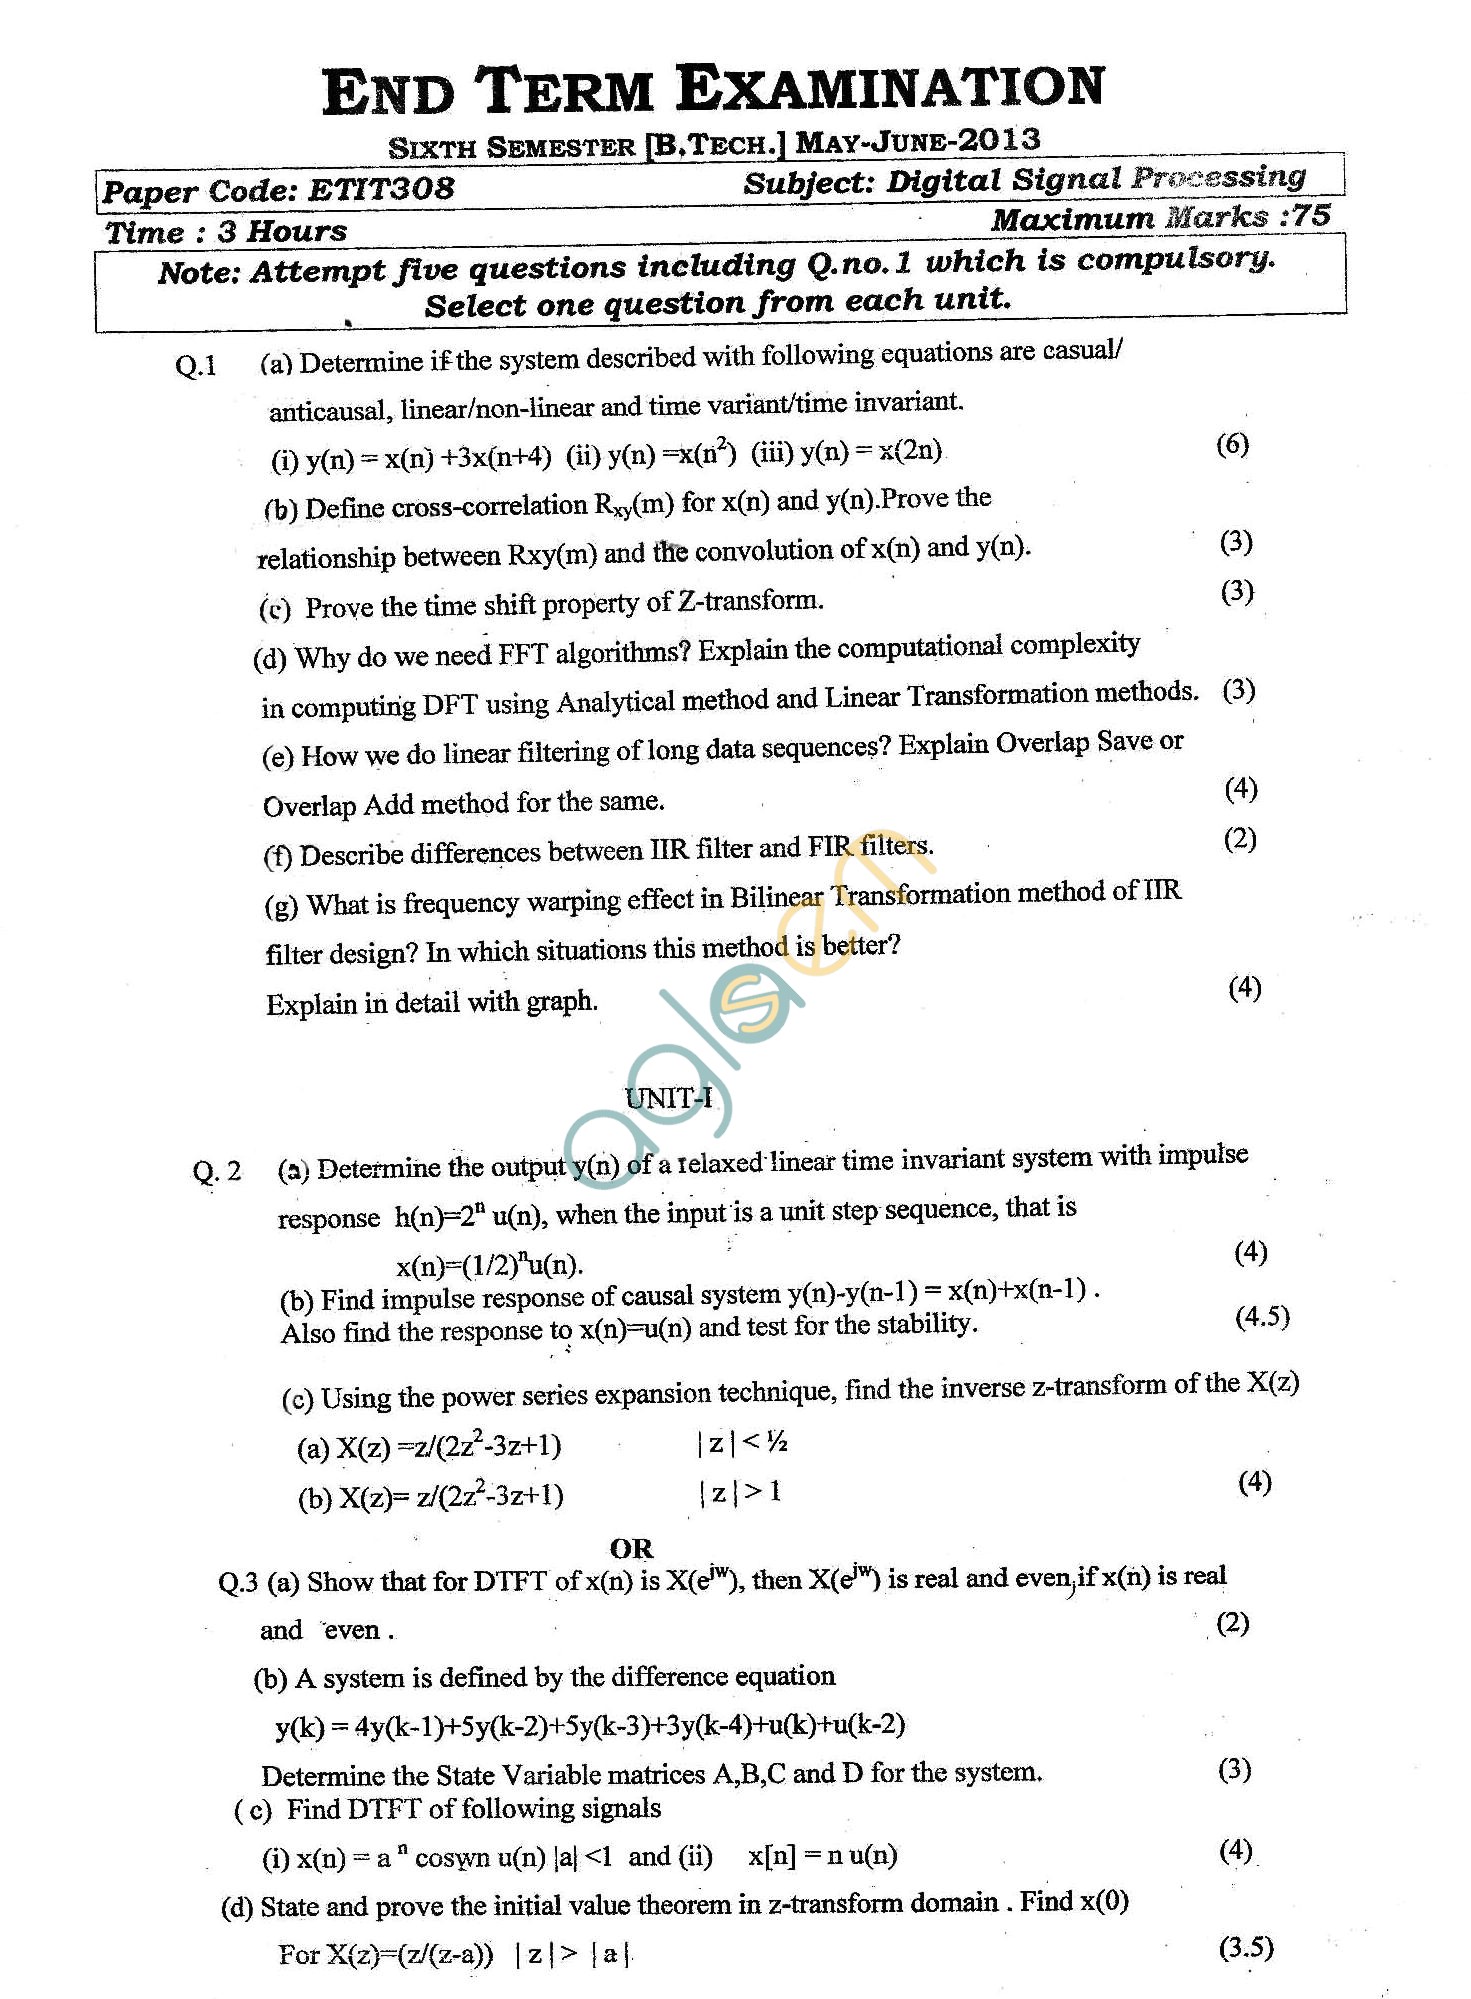 GGSIPU Question Papers Sixth Semester  End Term 2013  ETIT-308